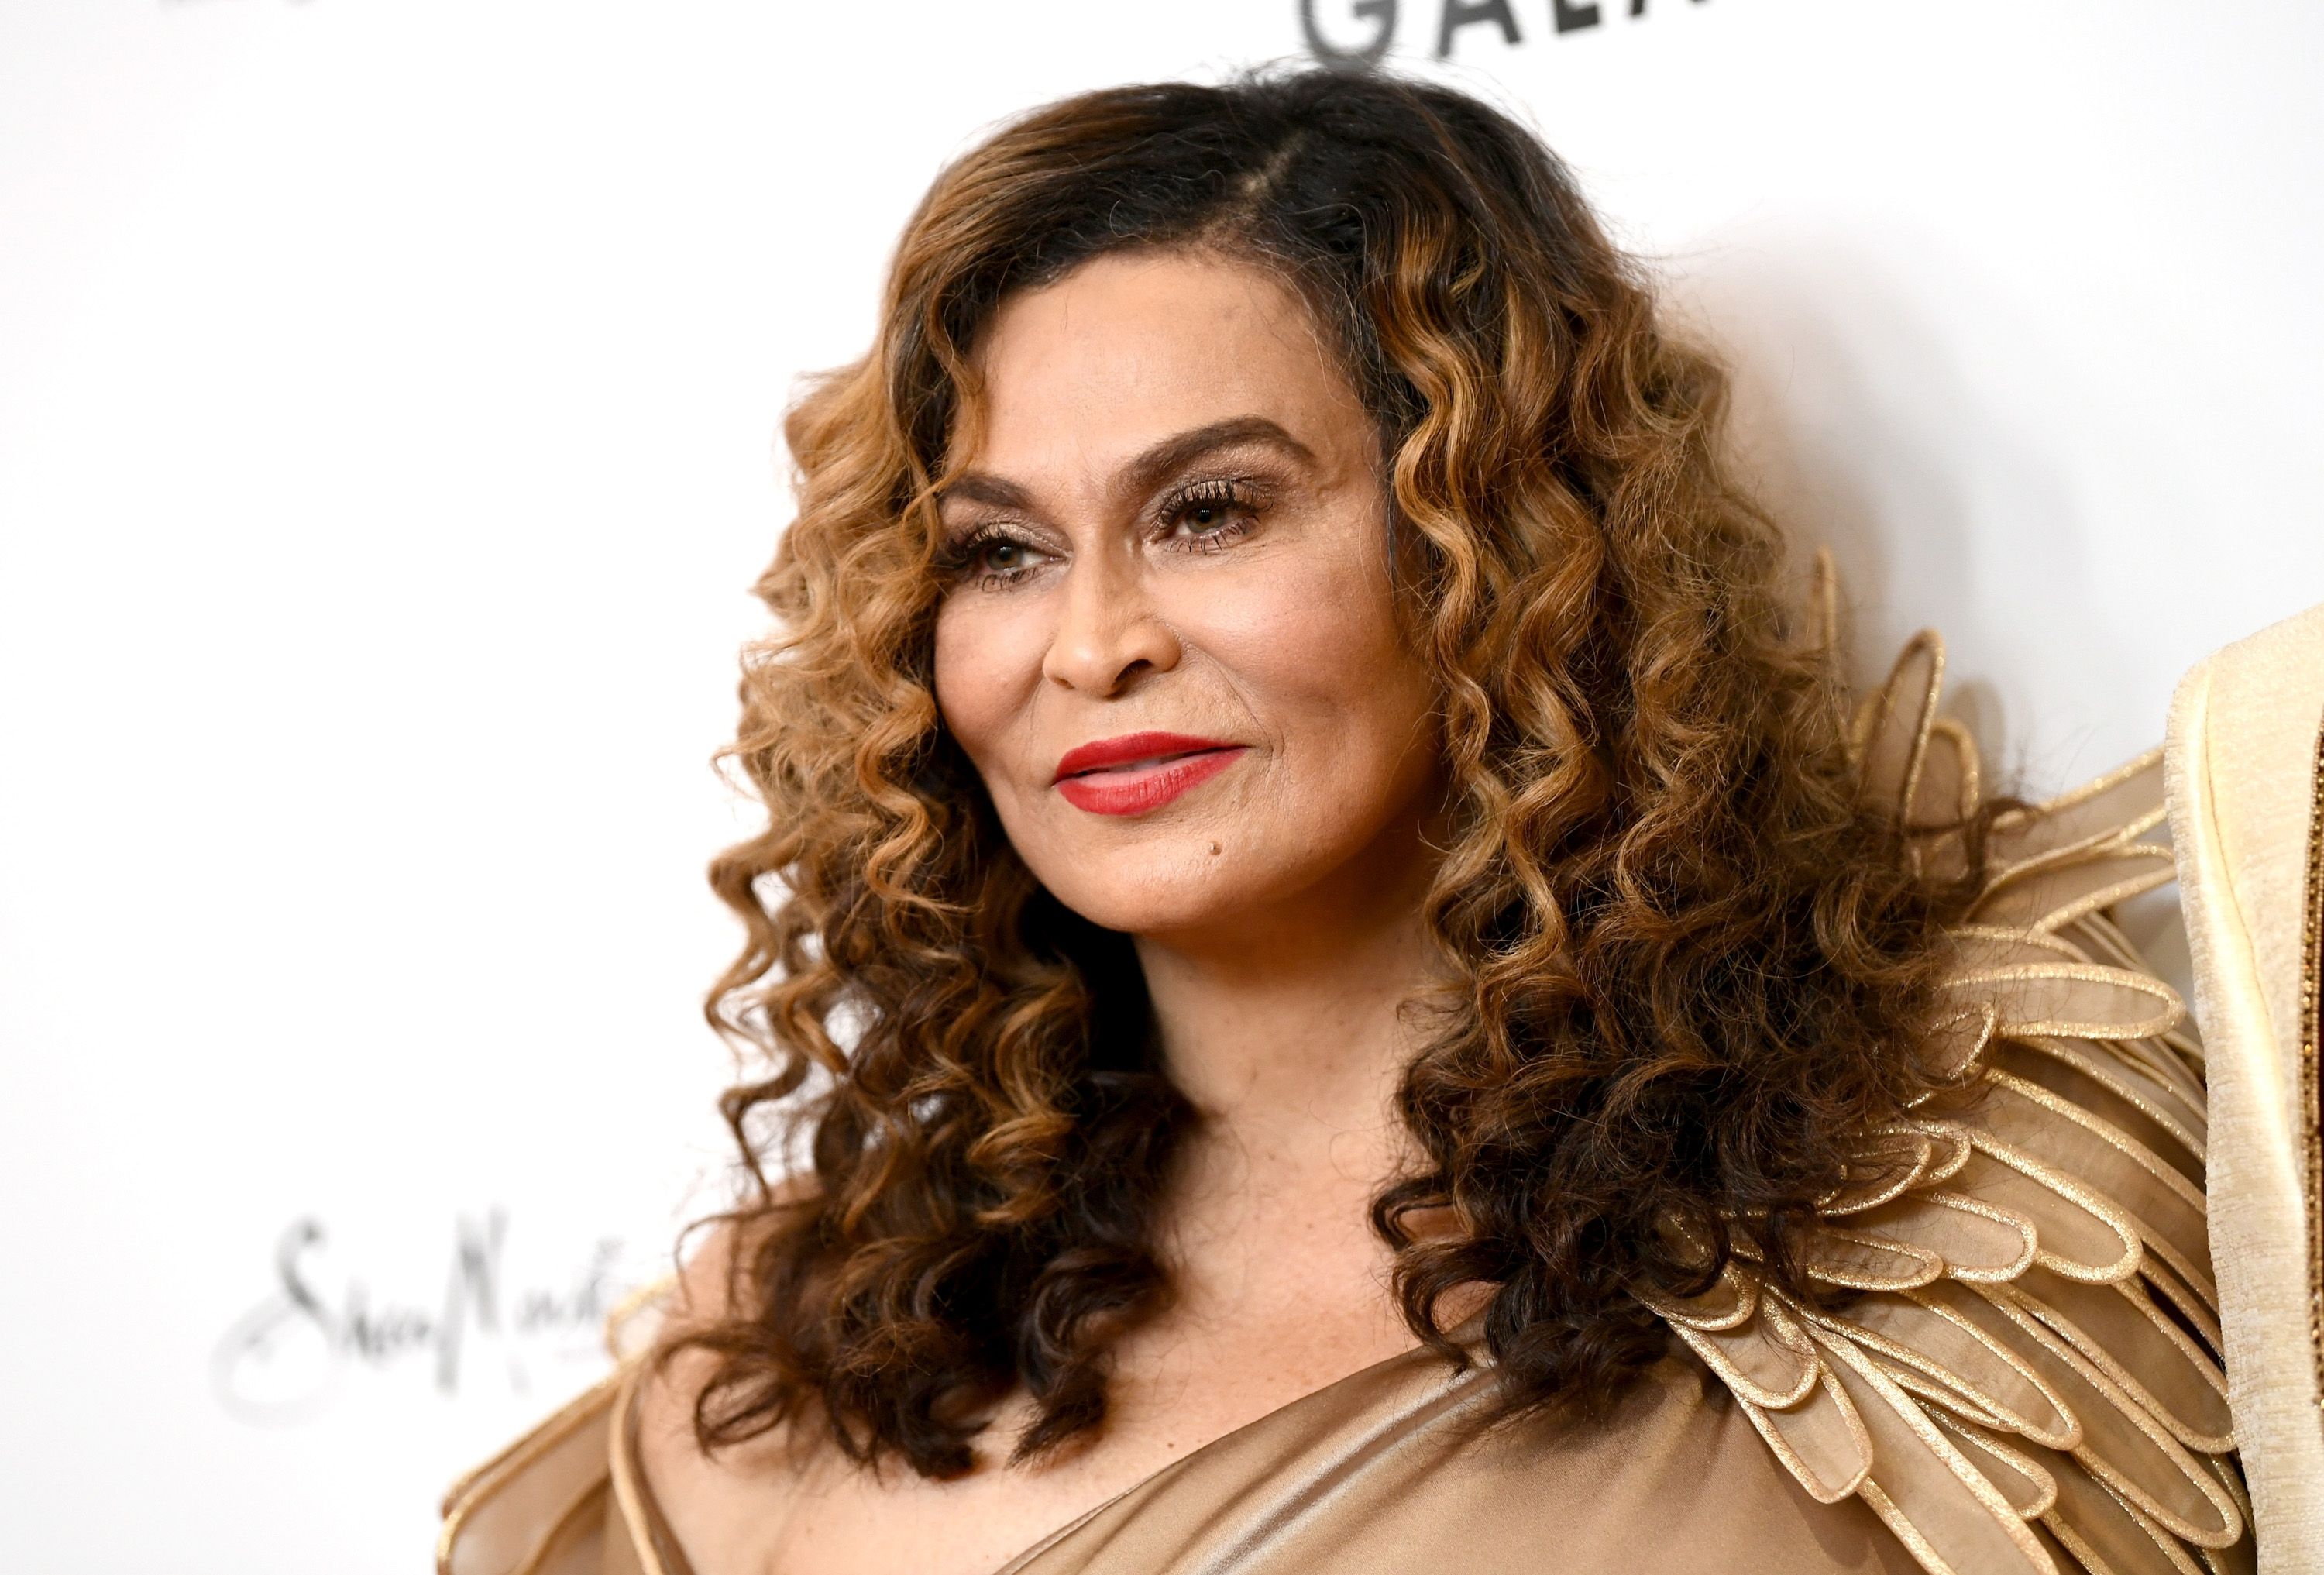 Tina Knowles at WACO Theater's 2nd Annual Wearable Art Gala on March 17, 2018. | Source: Getty Images